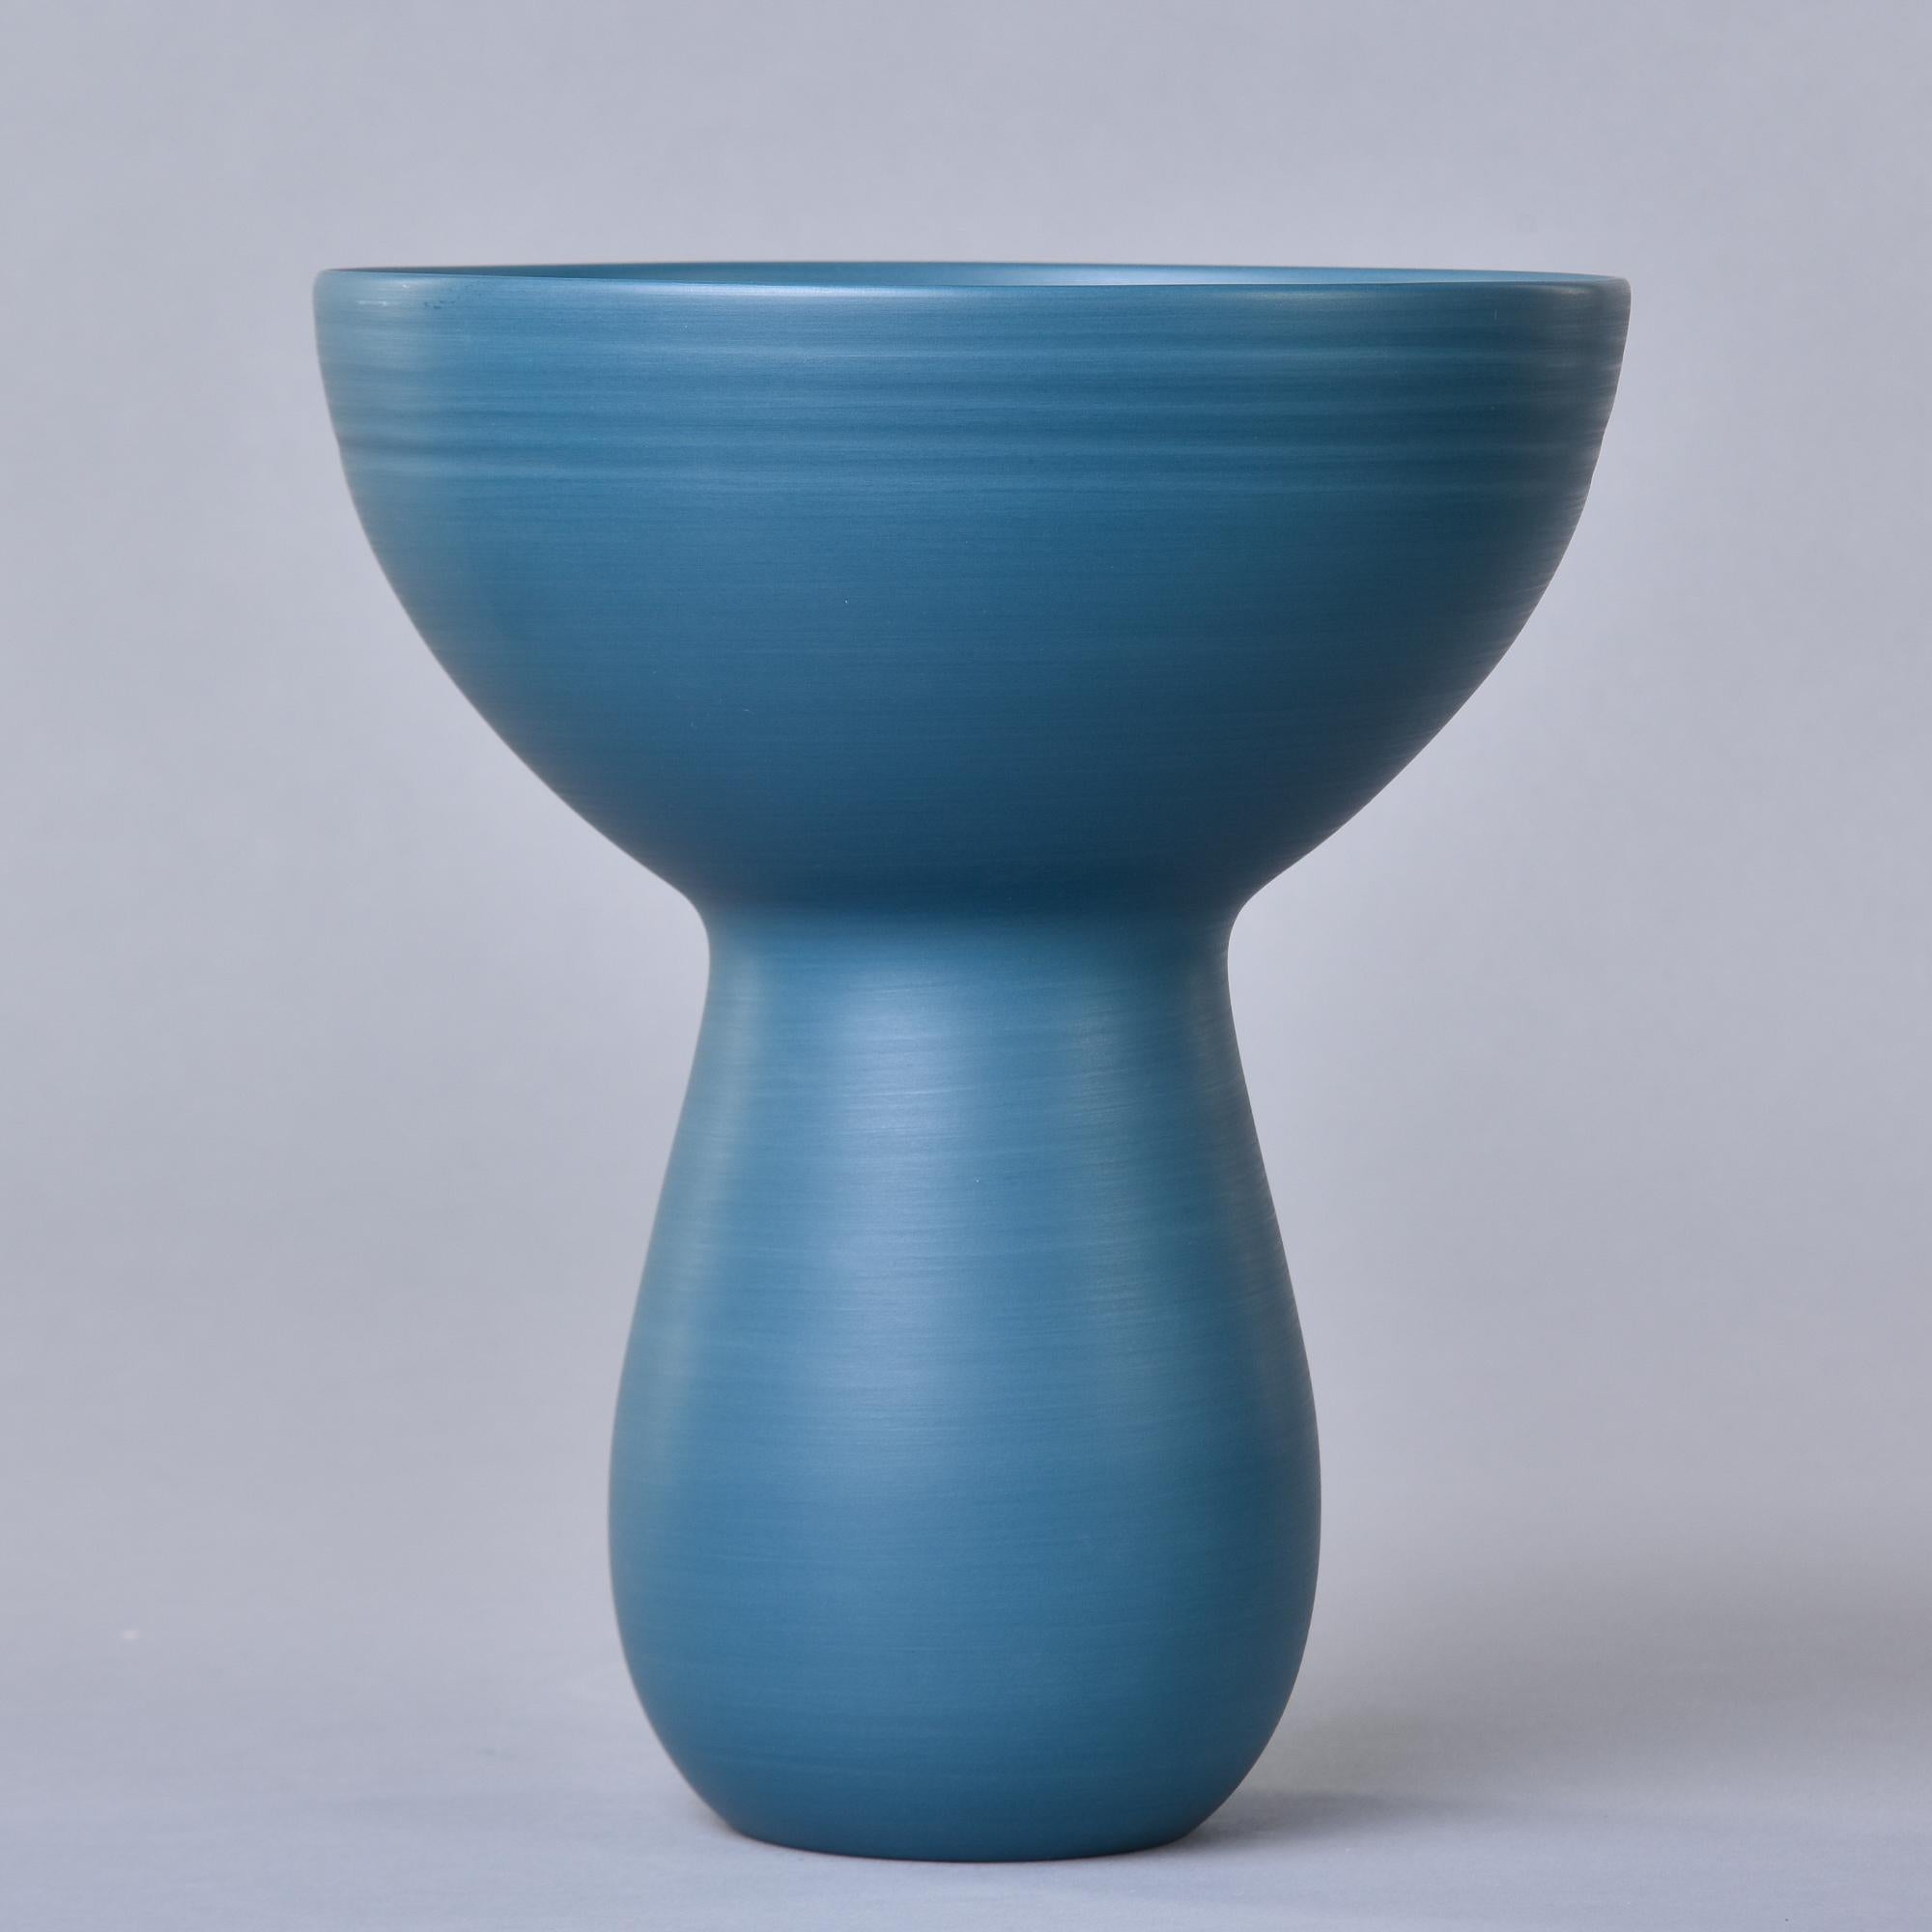 New and made in Italy by Rina Menardi, this bouquet vase stands 10” tall. This is finely crafted pottery has a saturated teal blue glaze inside and out, thin walls, and a sculptural shape with a narrow, rounded base and bowl-like rim. Signed by